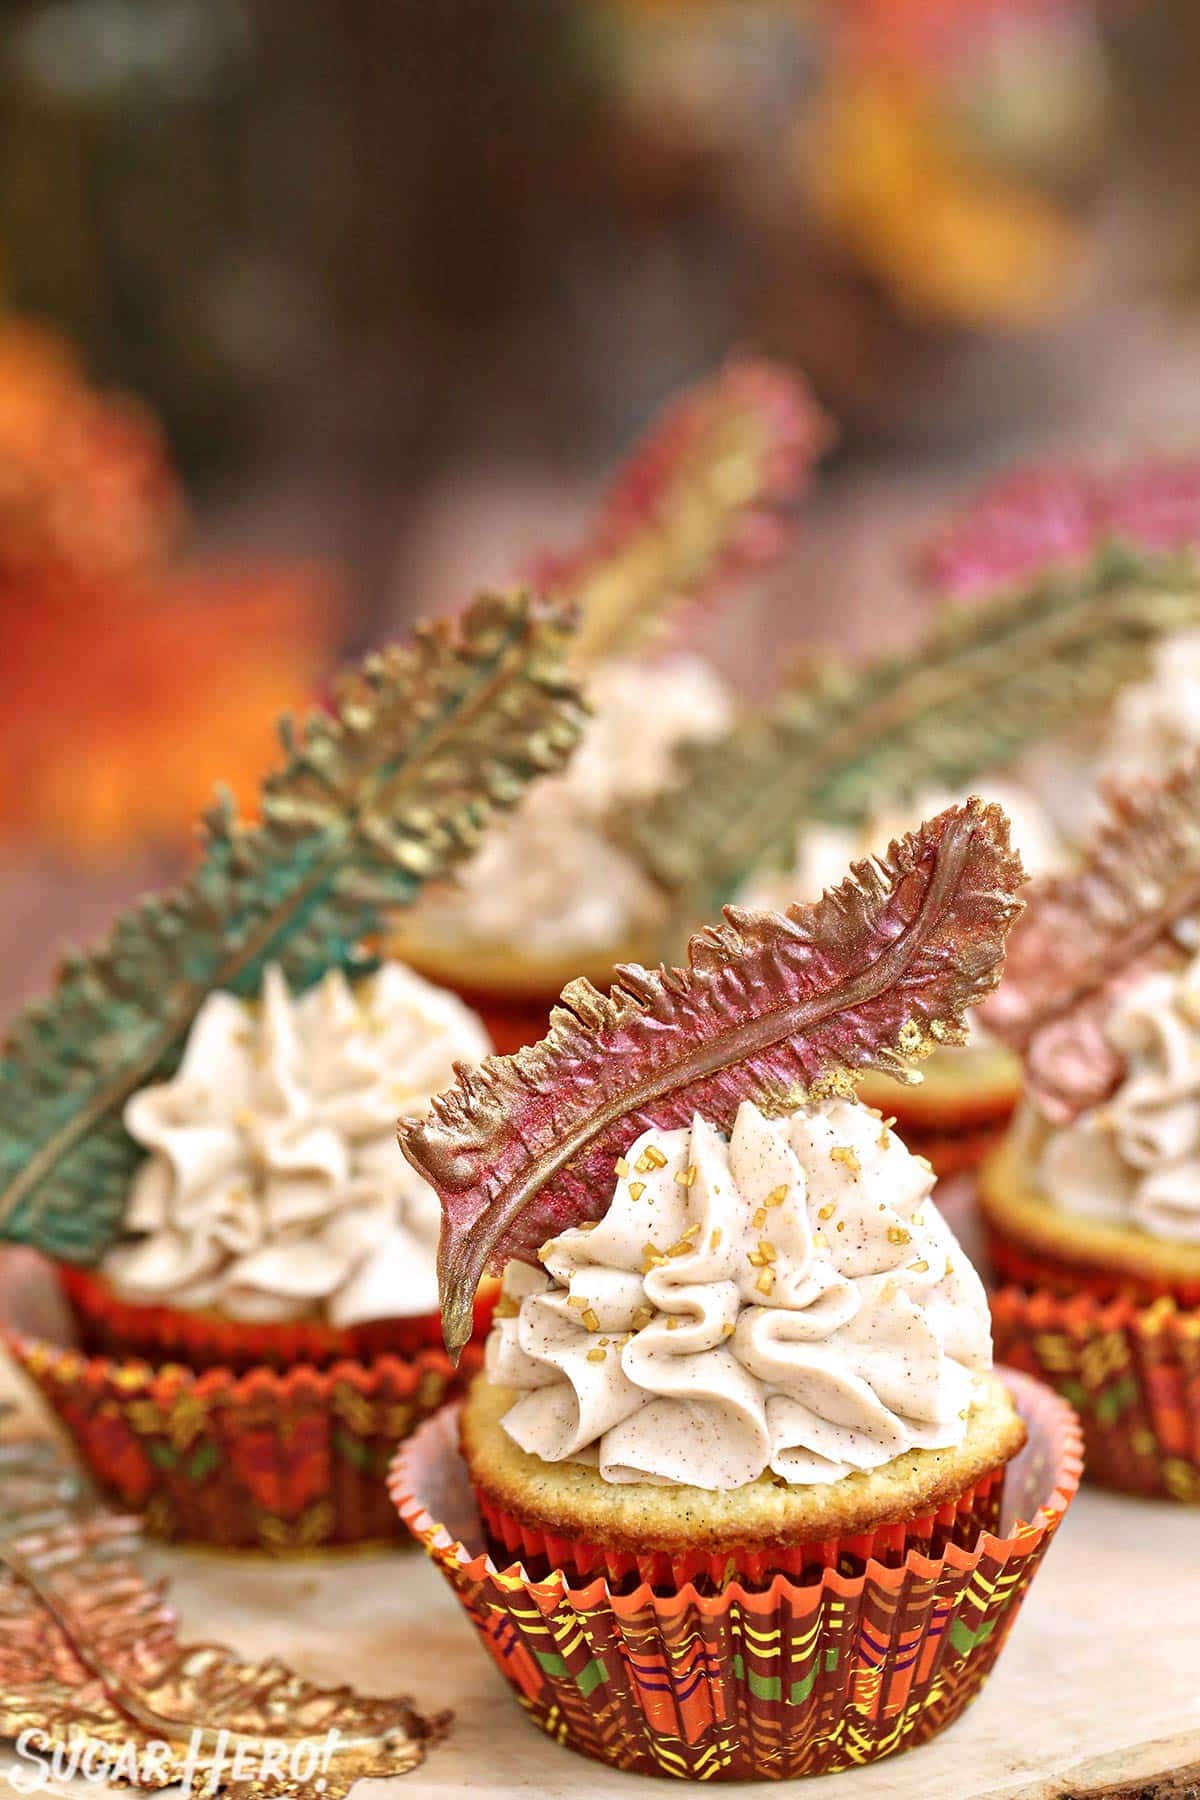 Group of Spice Cupcakes on a wooden platter.